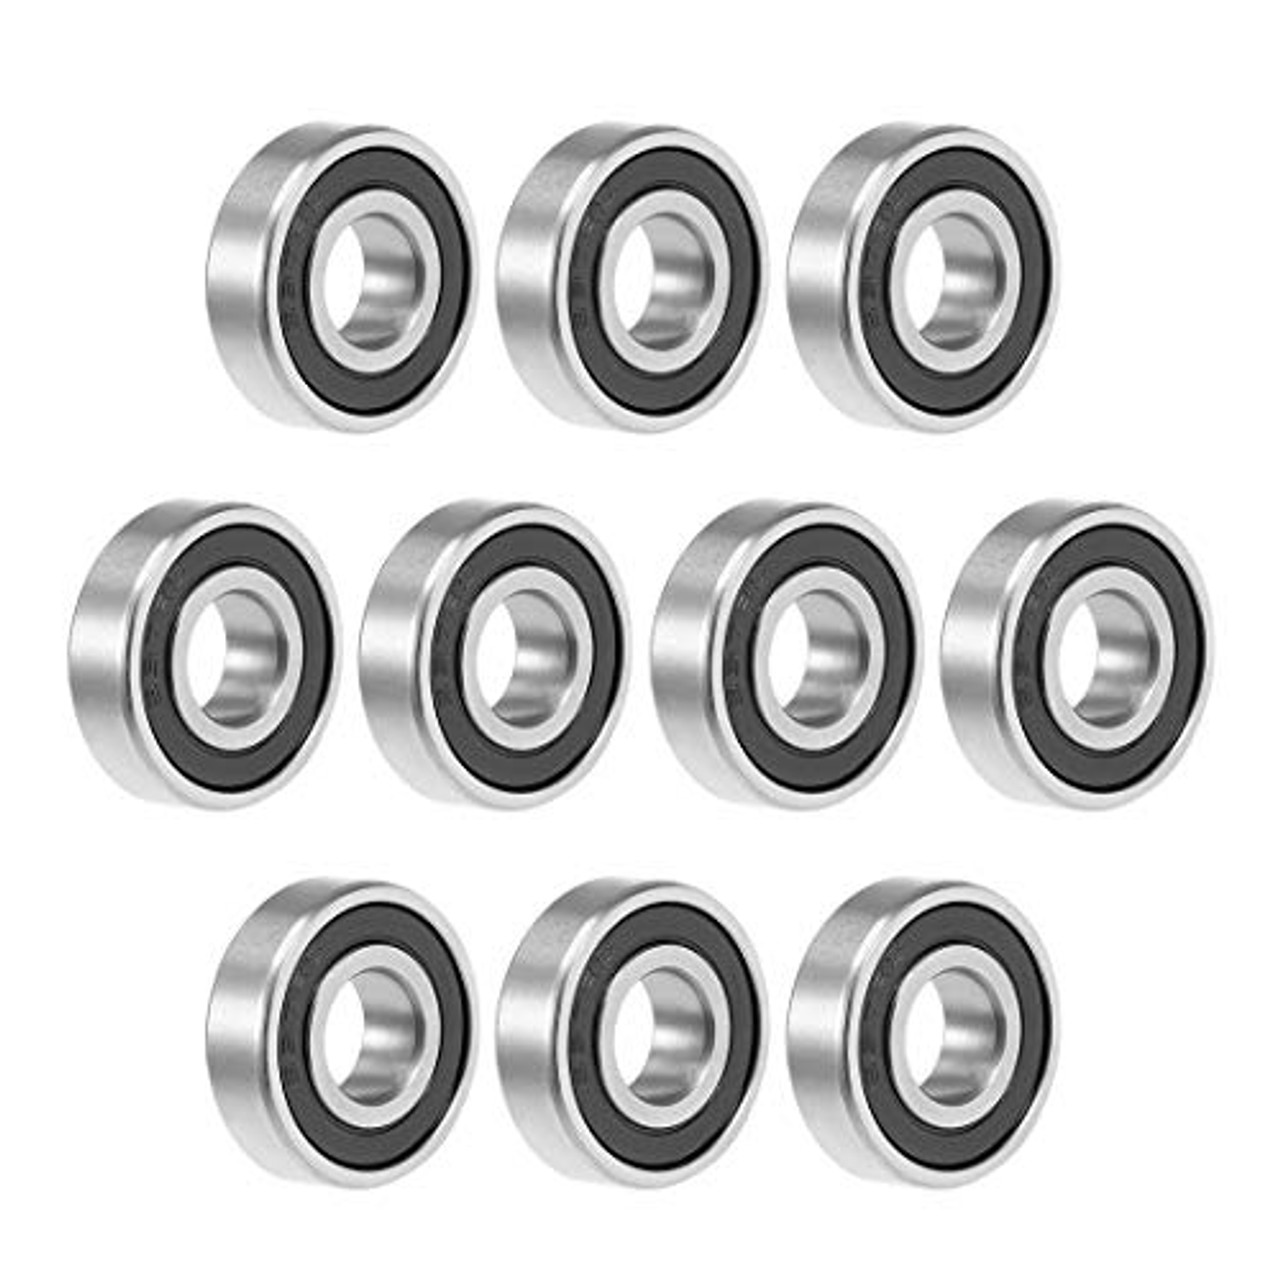 10PC Premium 697 2RS ABEC1 Rubber Sealed Deep Groove Ball Bearing 7 x 17 x 5mm 